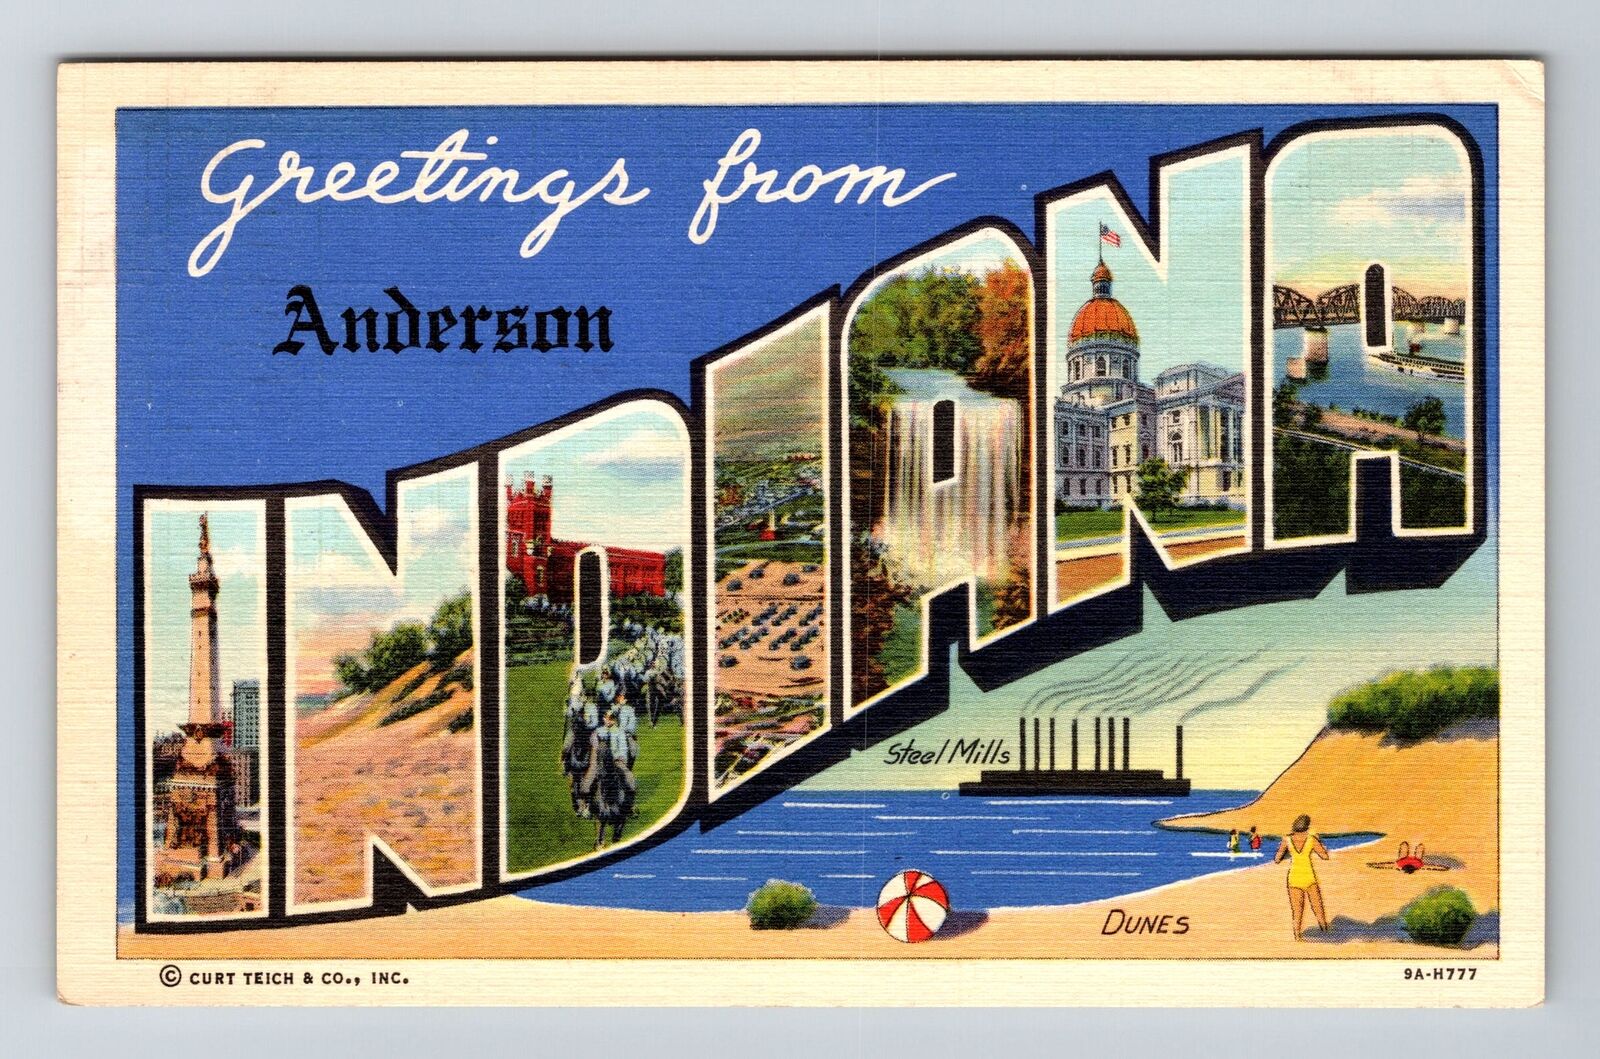 Anderson IN-Indiana, LARGE LETTER Greetings, c1940 Vintage Souvenir Postcard